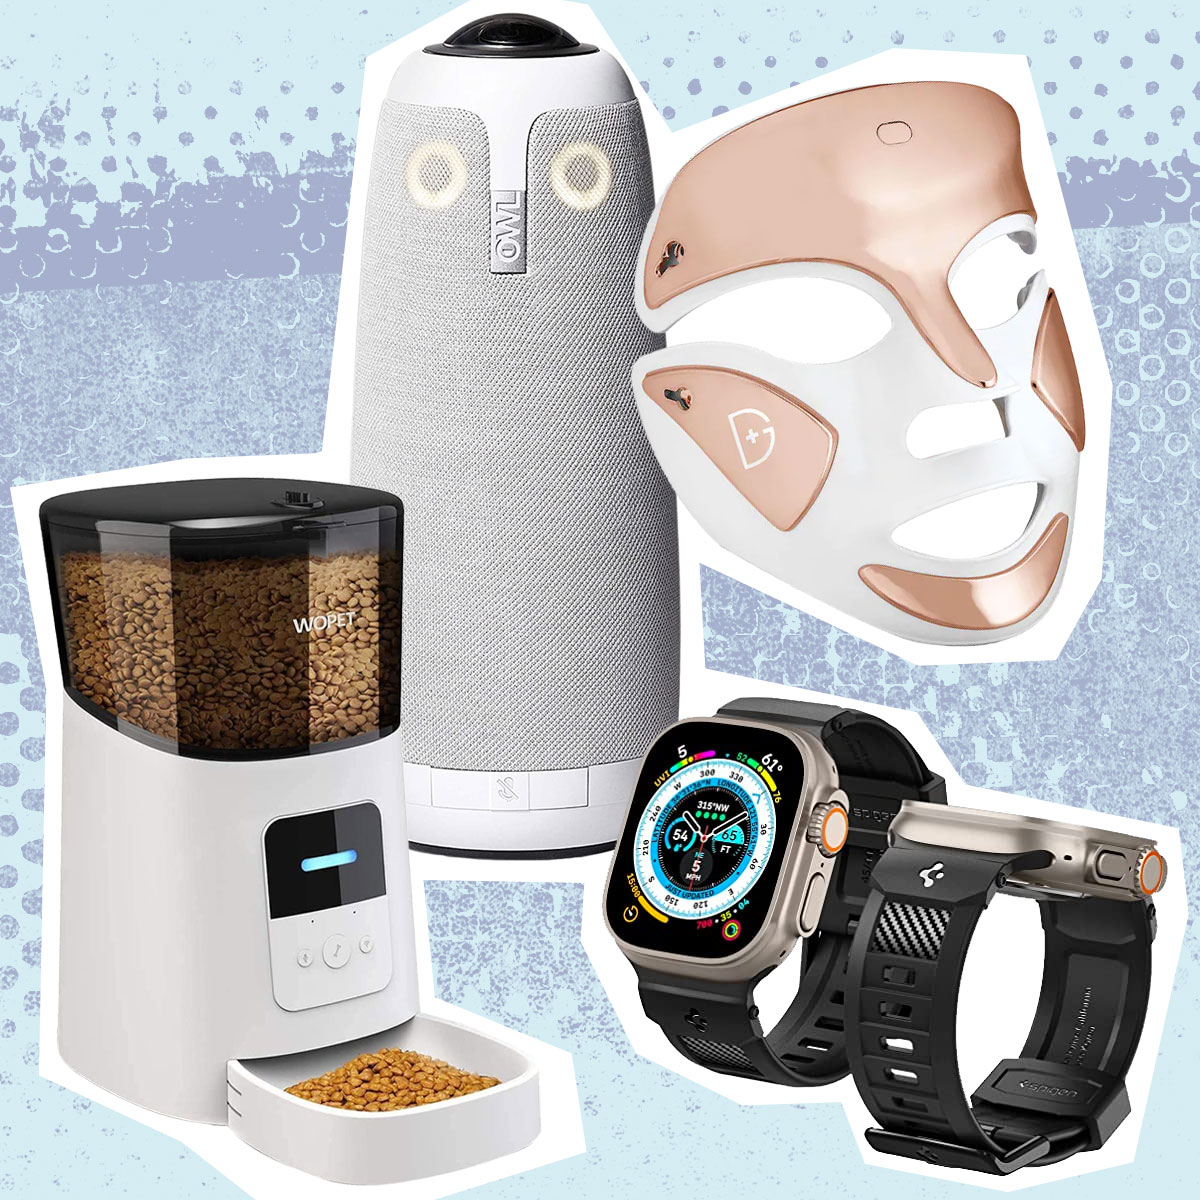 The Best Tech Gifts And Gadgets In 2022